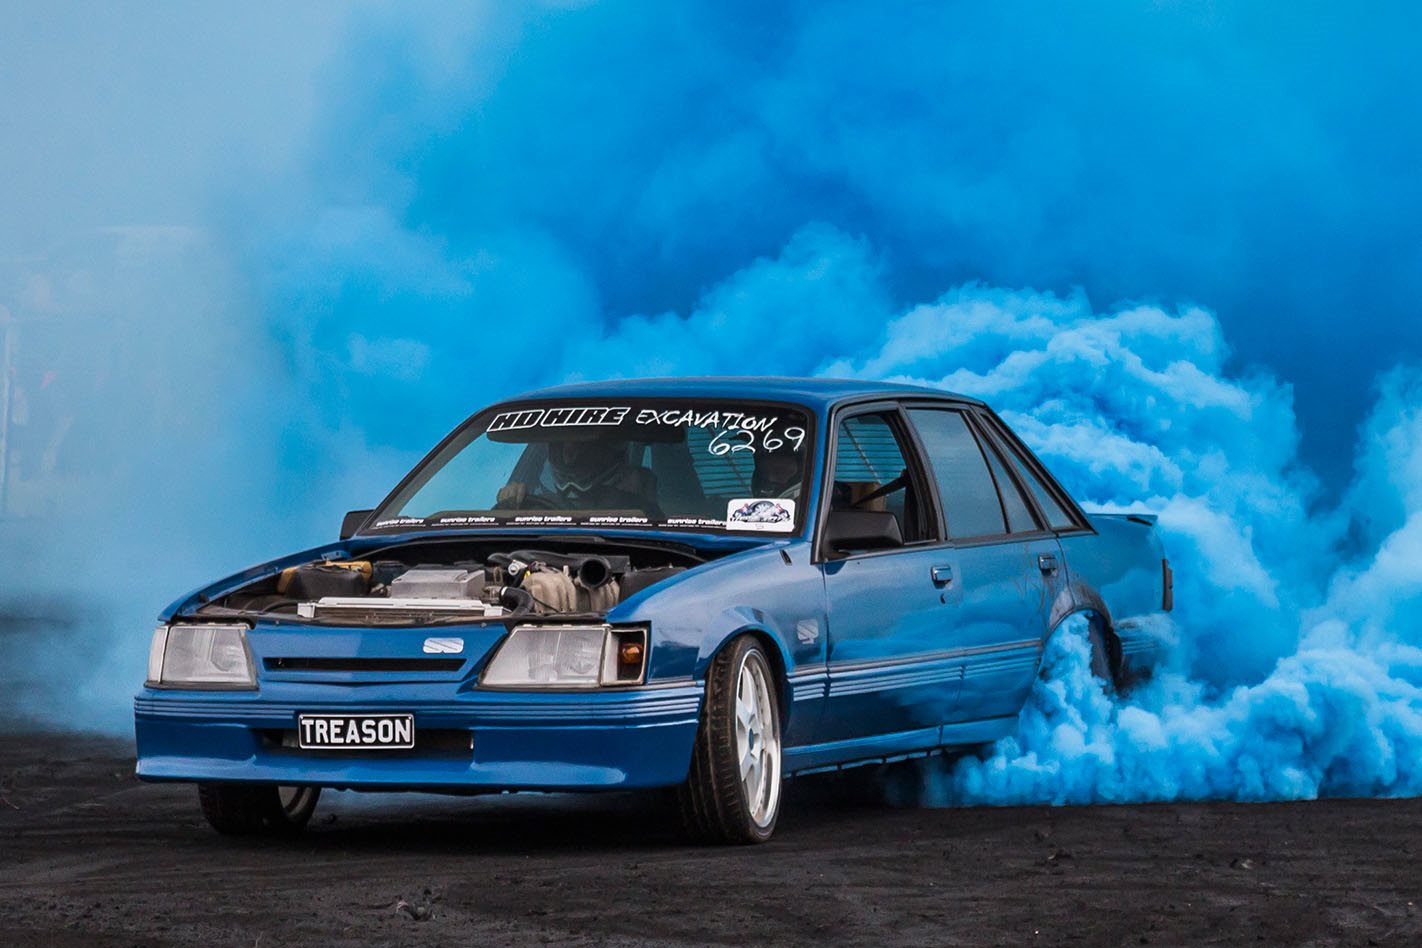 Barra swapped VK Commodore burnout car Video